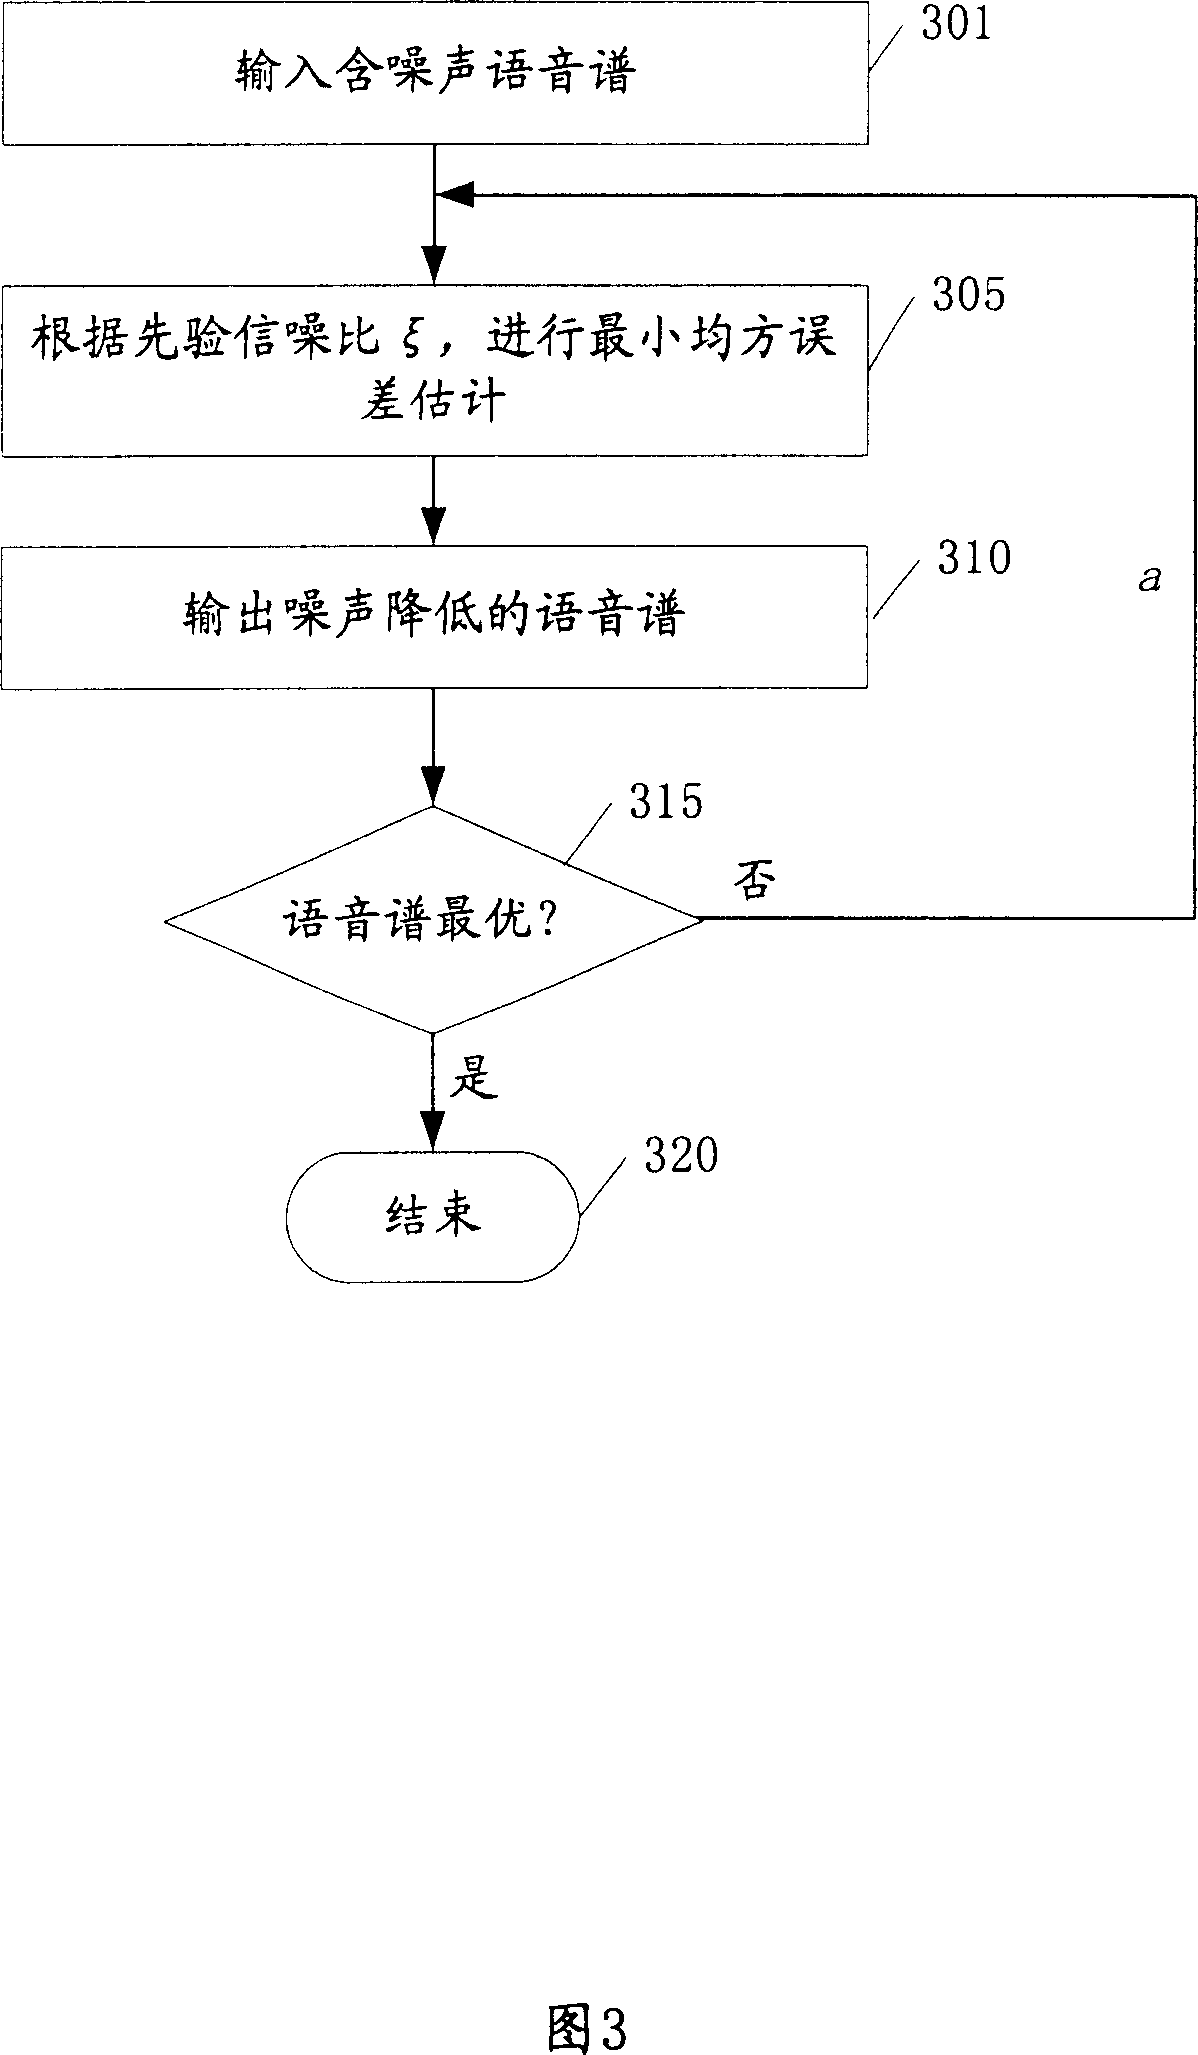 Method and device for controlling noise, smoothing speech manual, extracting speech characteristic, phonetic recognition and training phonetic mould